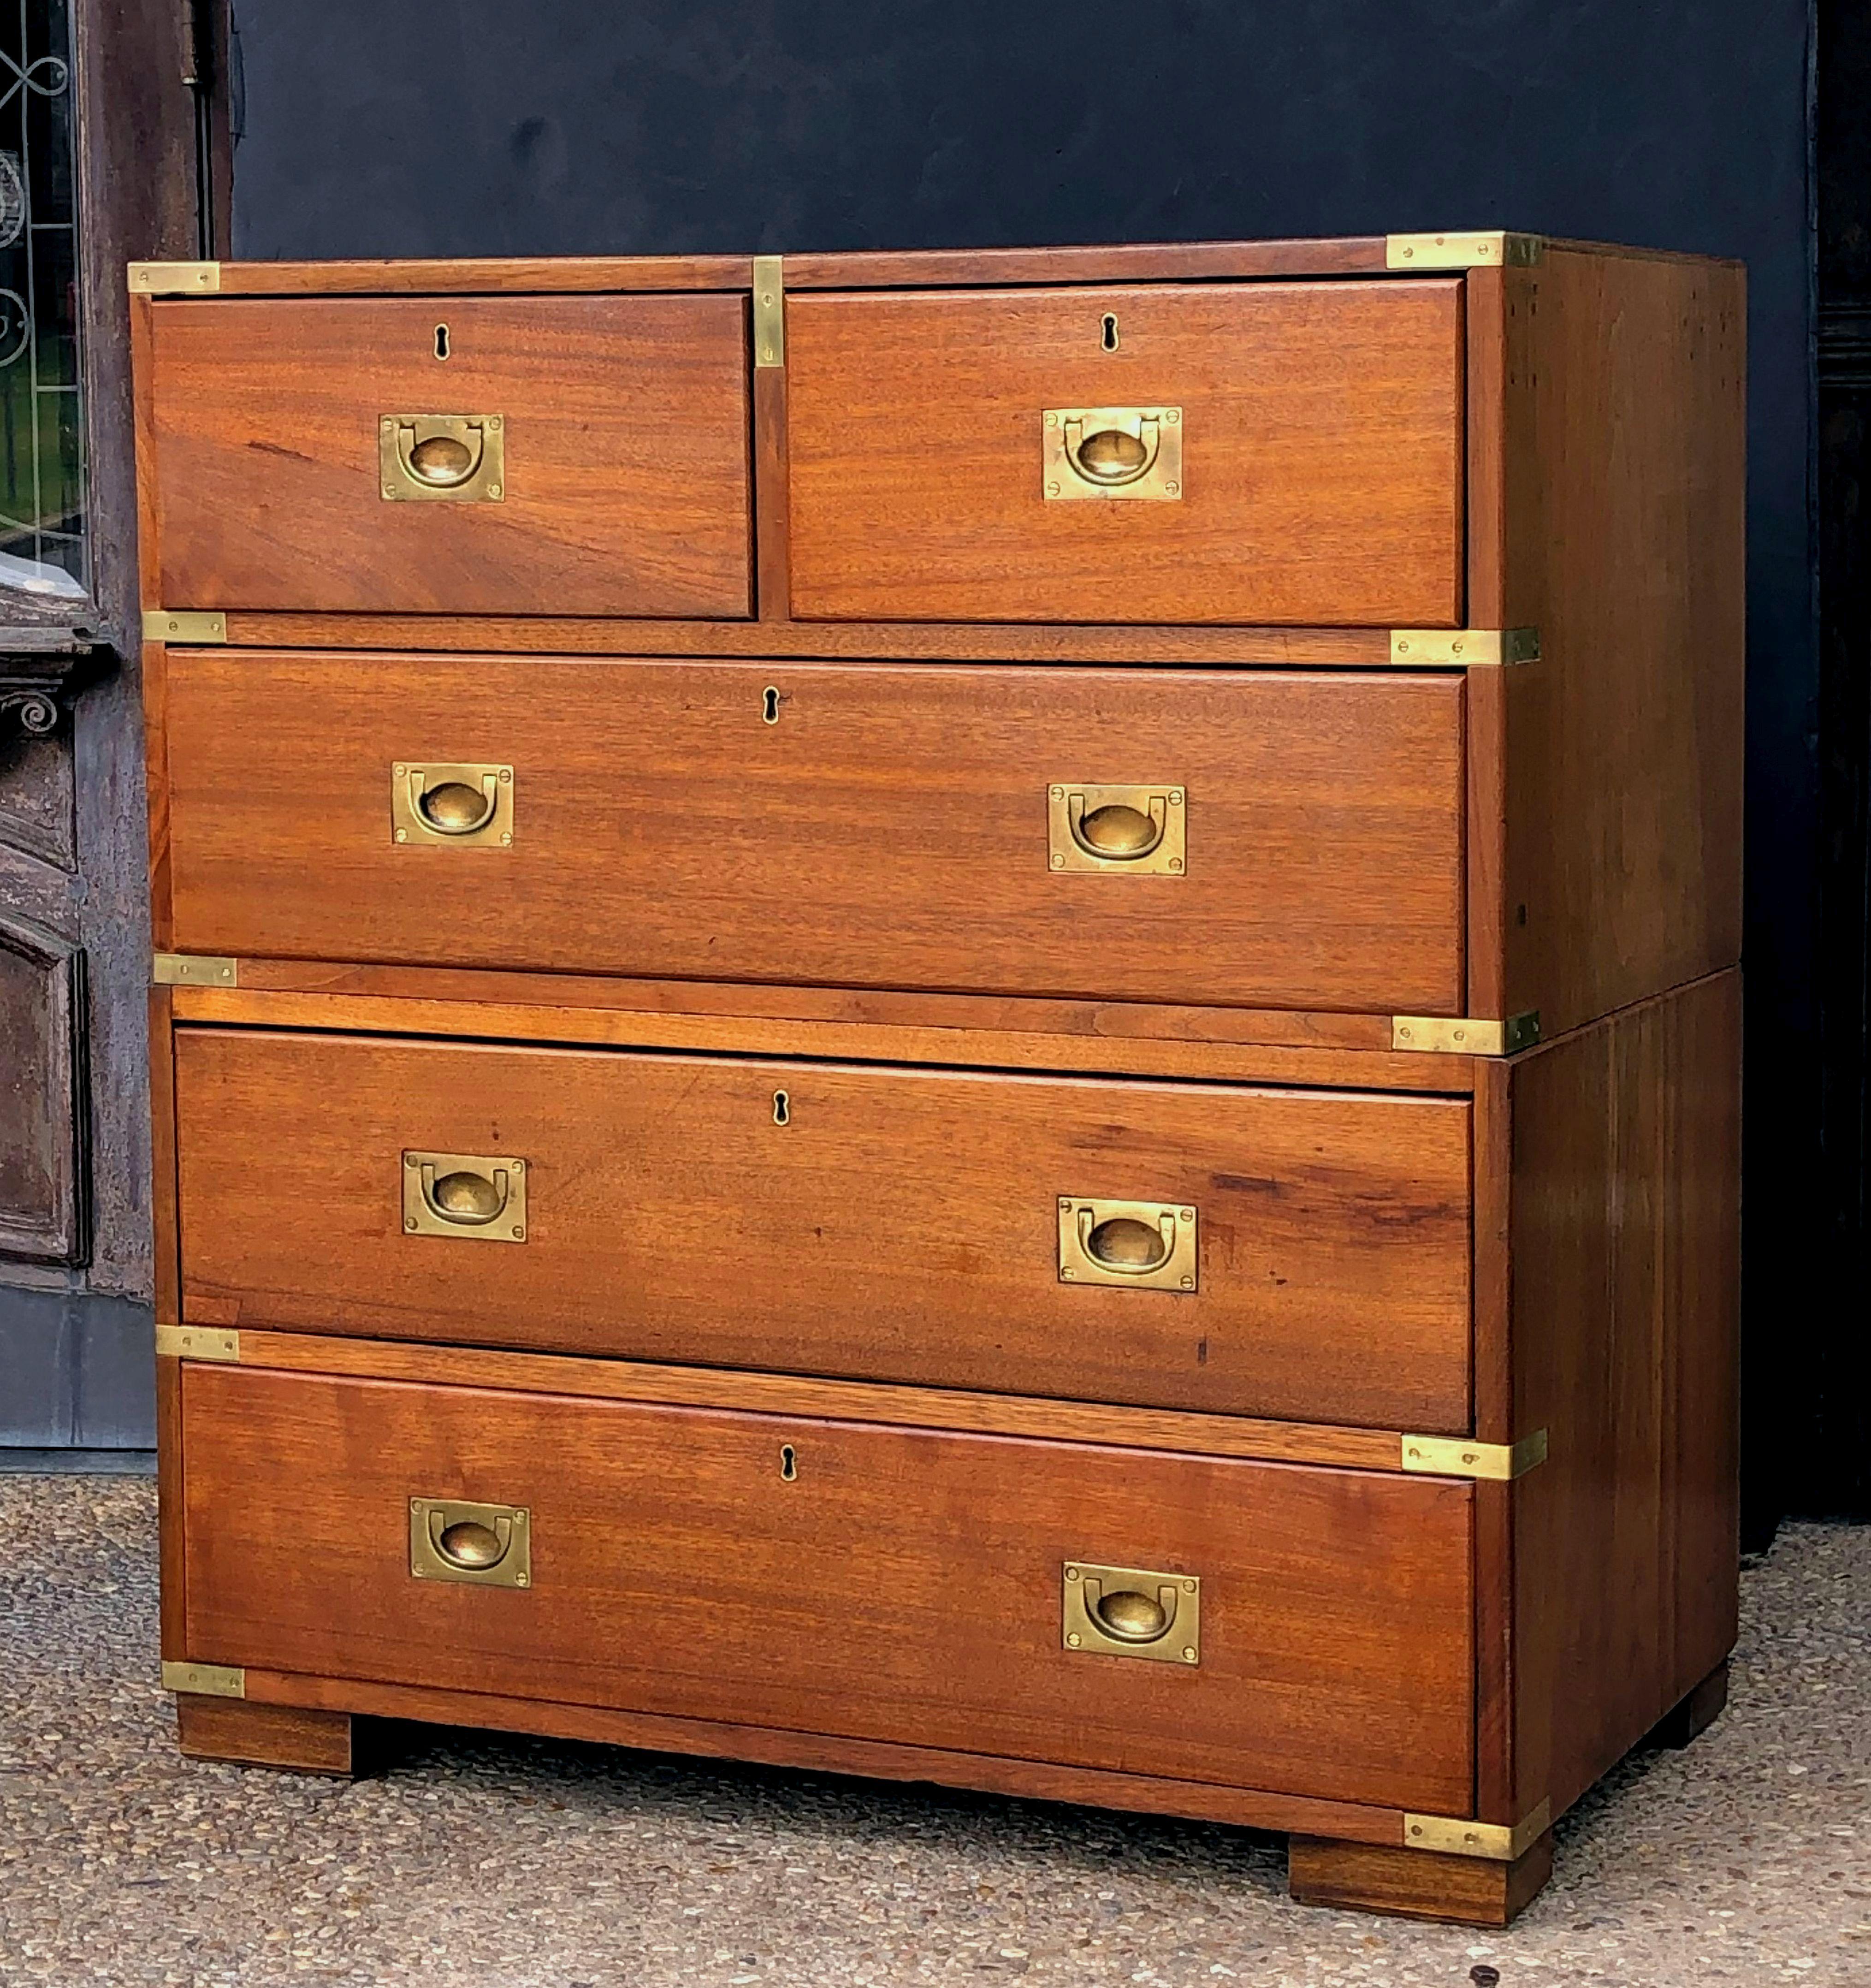 A fine English military officer’s Campaign Ware chest, from the 19th c., featuring a handsome oak and mahogany exterior, showing two short drawers over three long drawers. The brass-bound chest, in two parts, accented with brass hardware, resting on